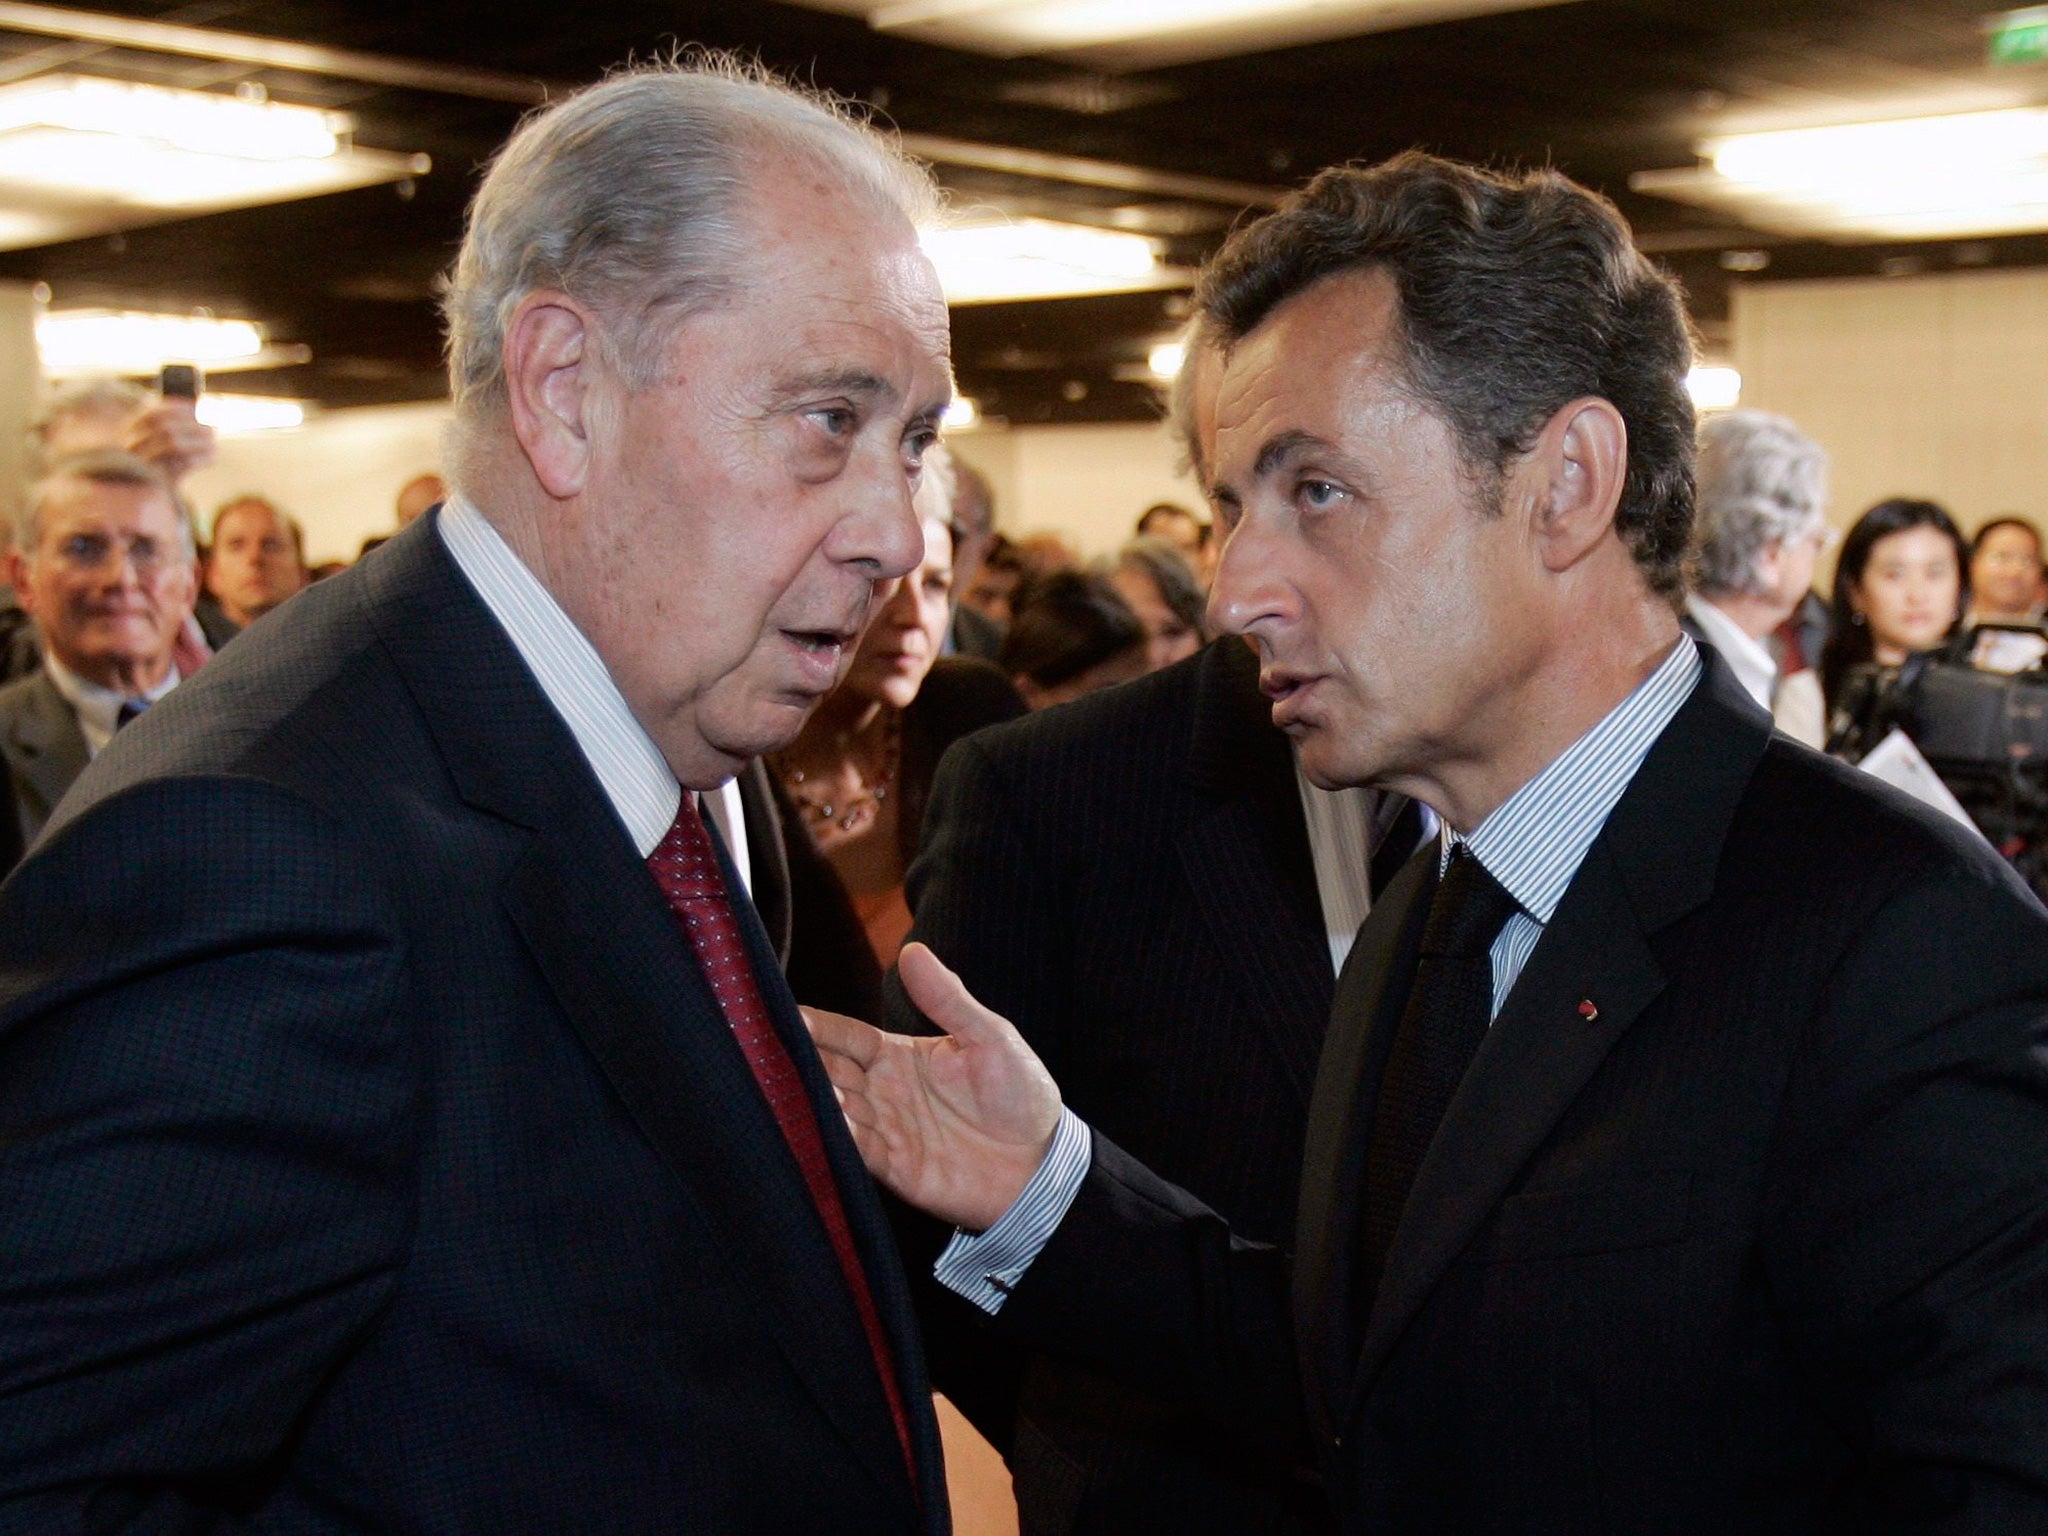 Pasqua, left, in 2009 with the then French President Nicolas Sarkozy, to whom he was an early mentor